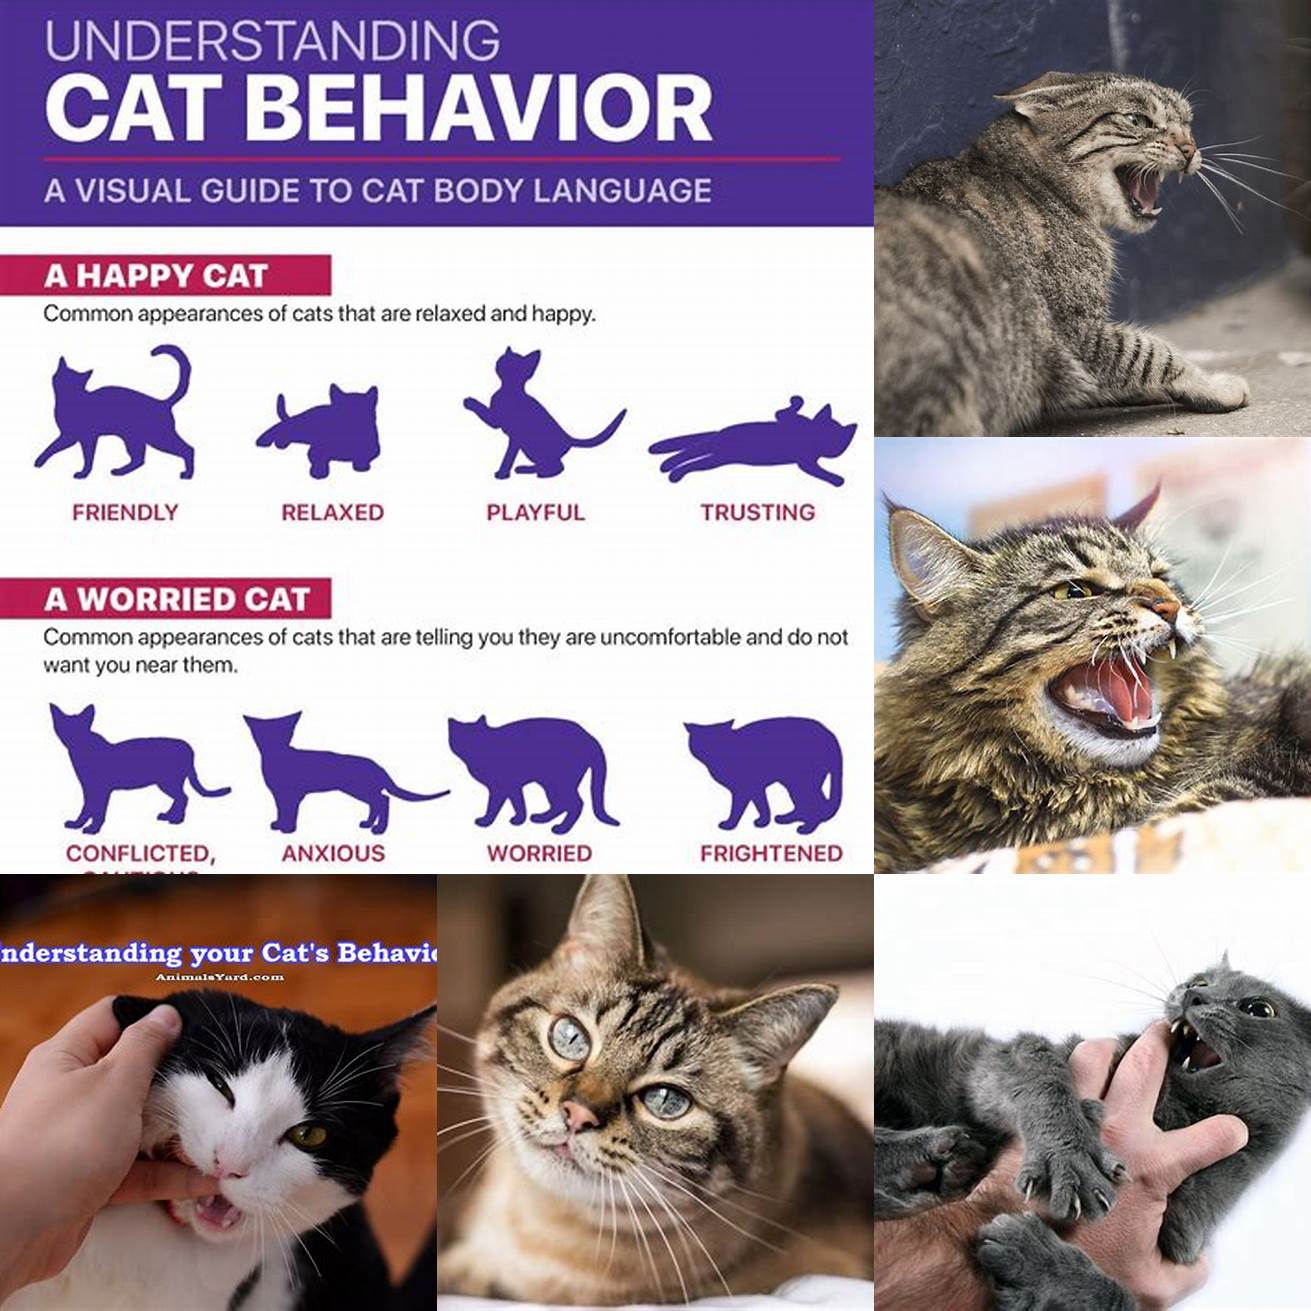 Monitor your cats behavior closely and intervene as soon as you notice any signs of aggression